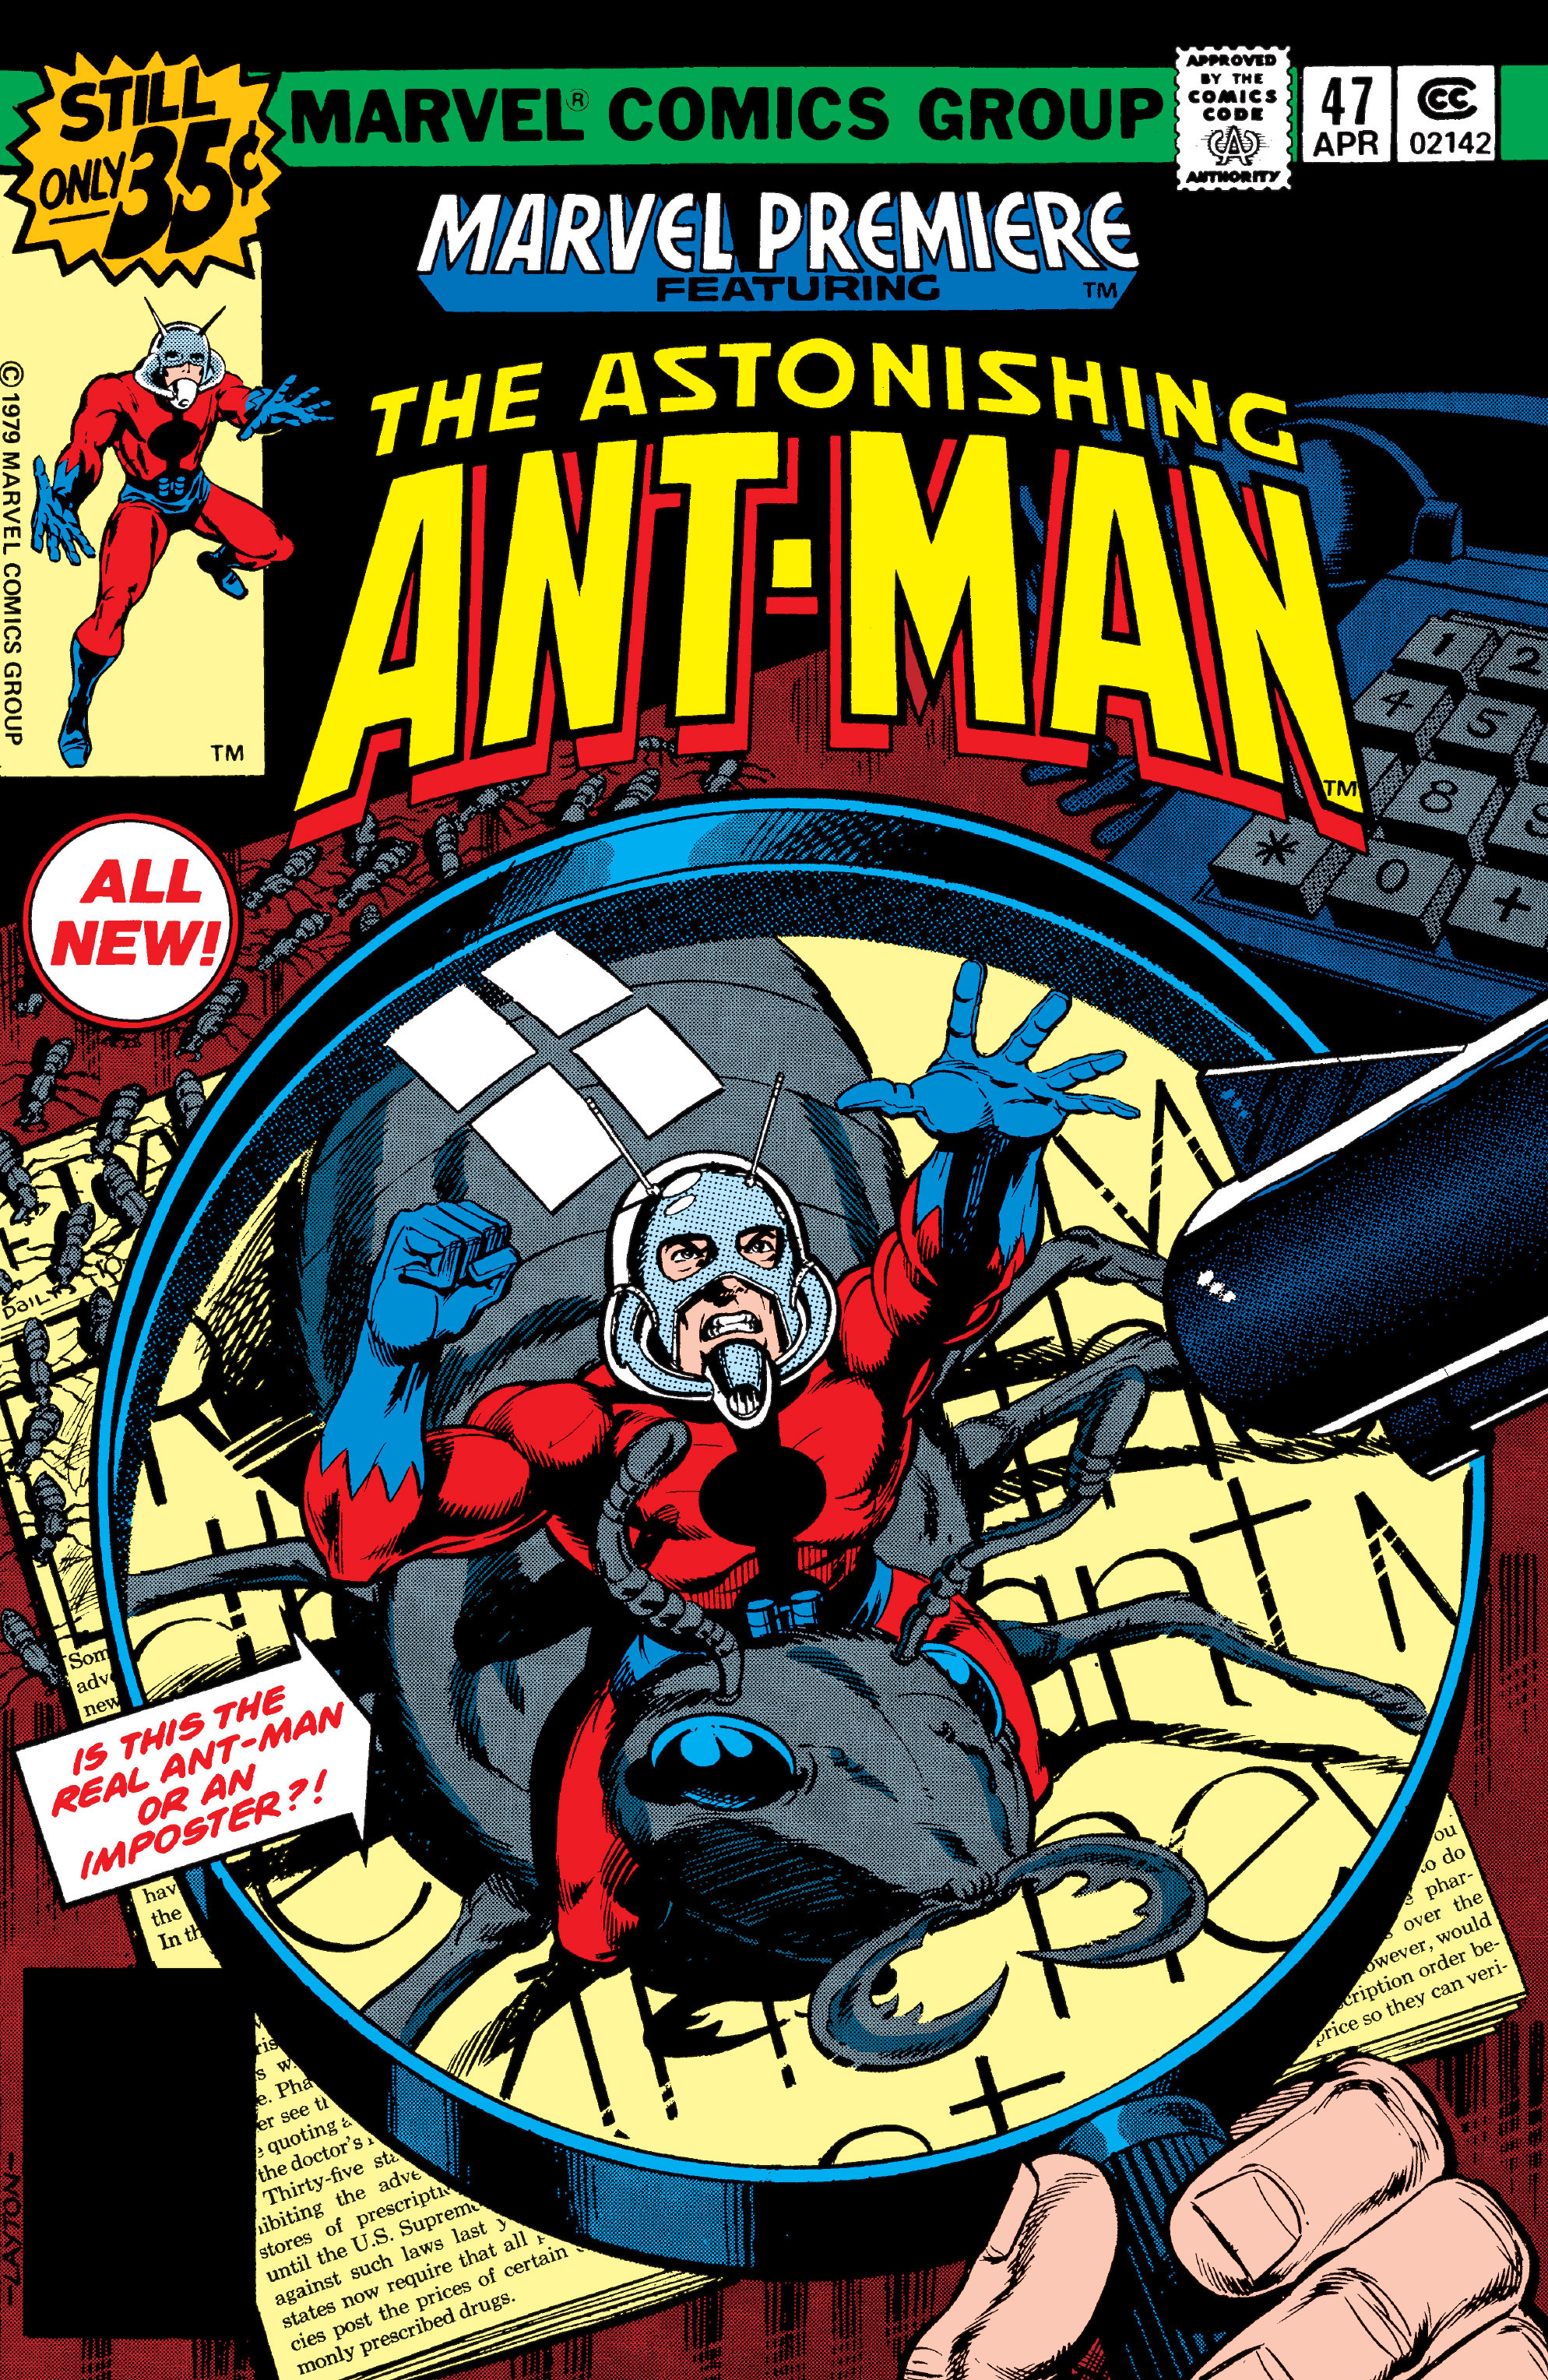 Read online Marvel Premiere comic -  Issue #47 - 1